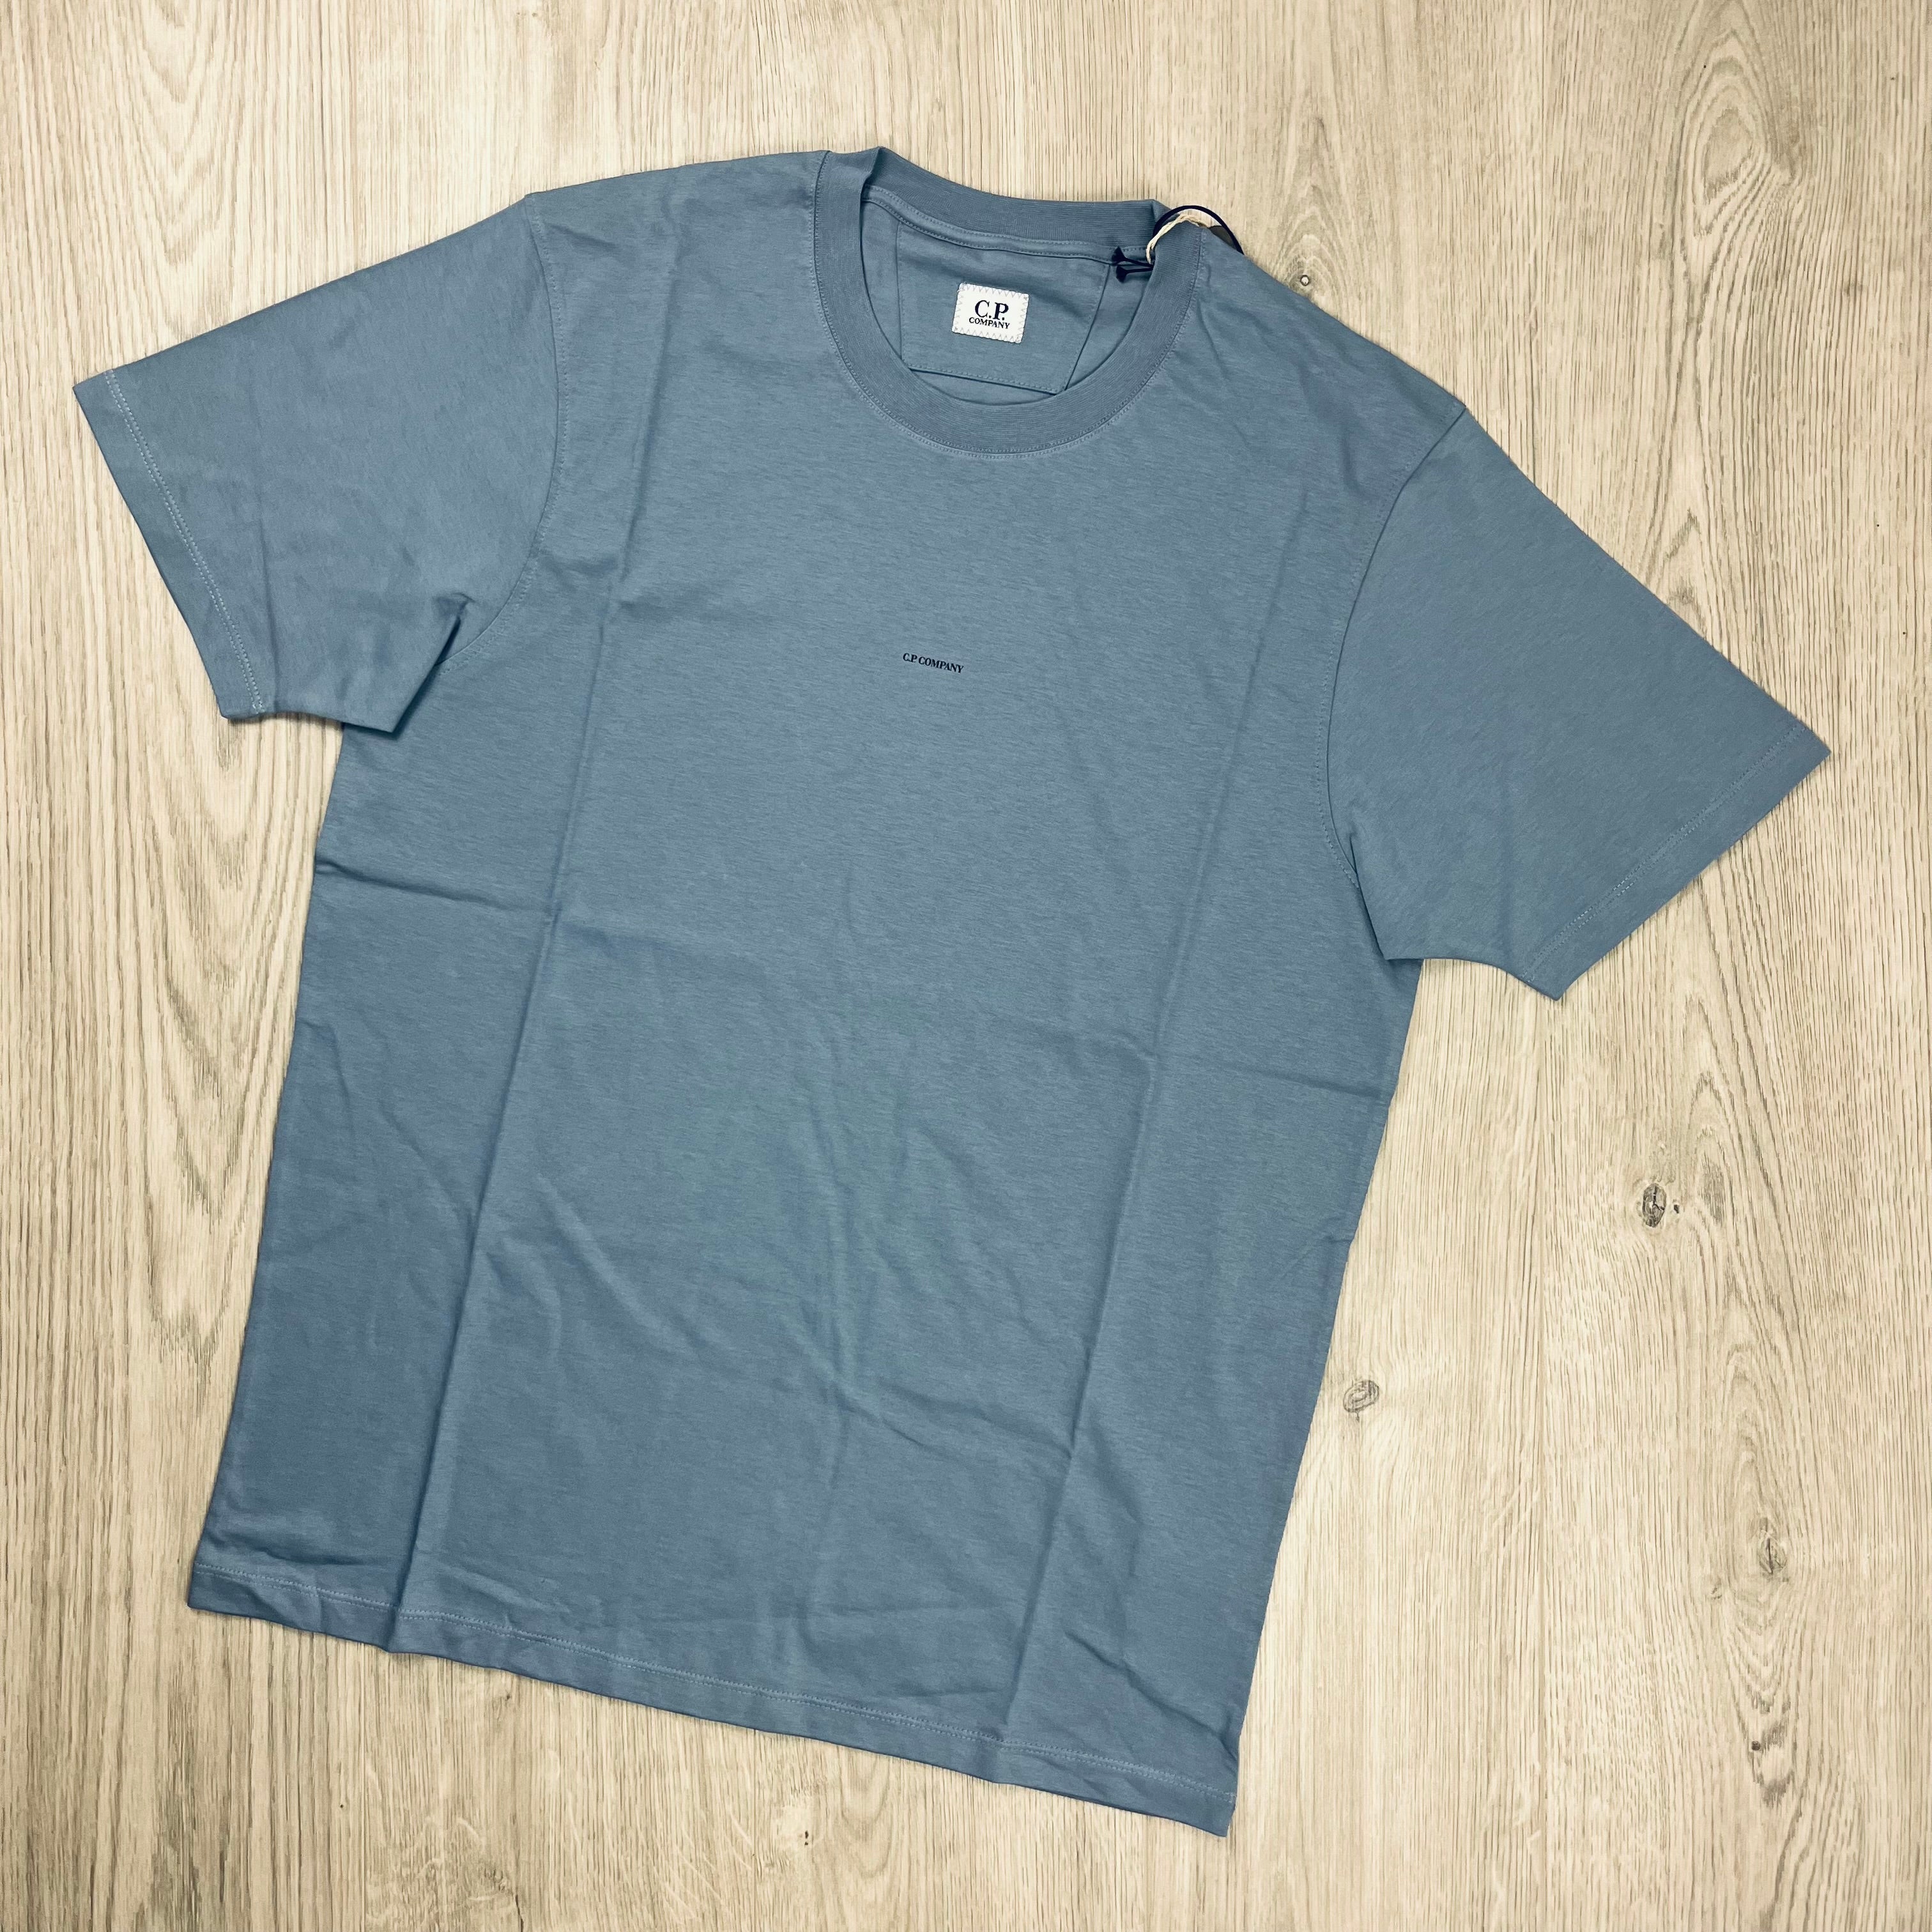 CP Company Graphic T-shirt